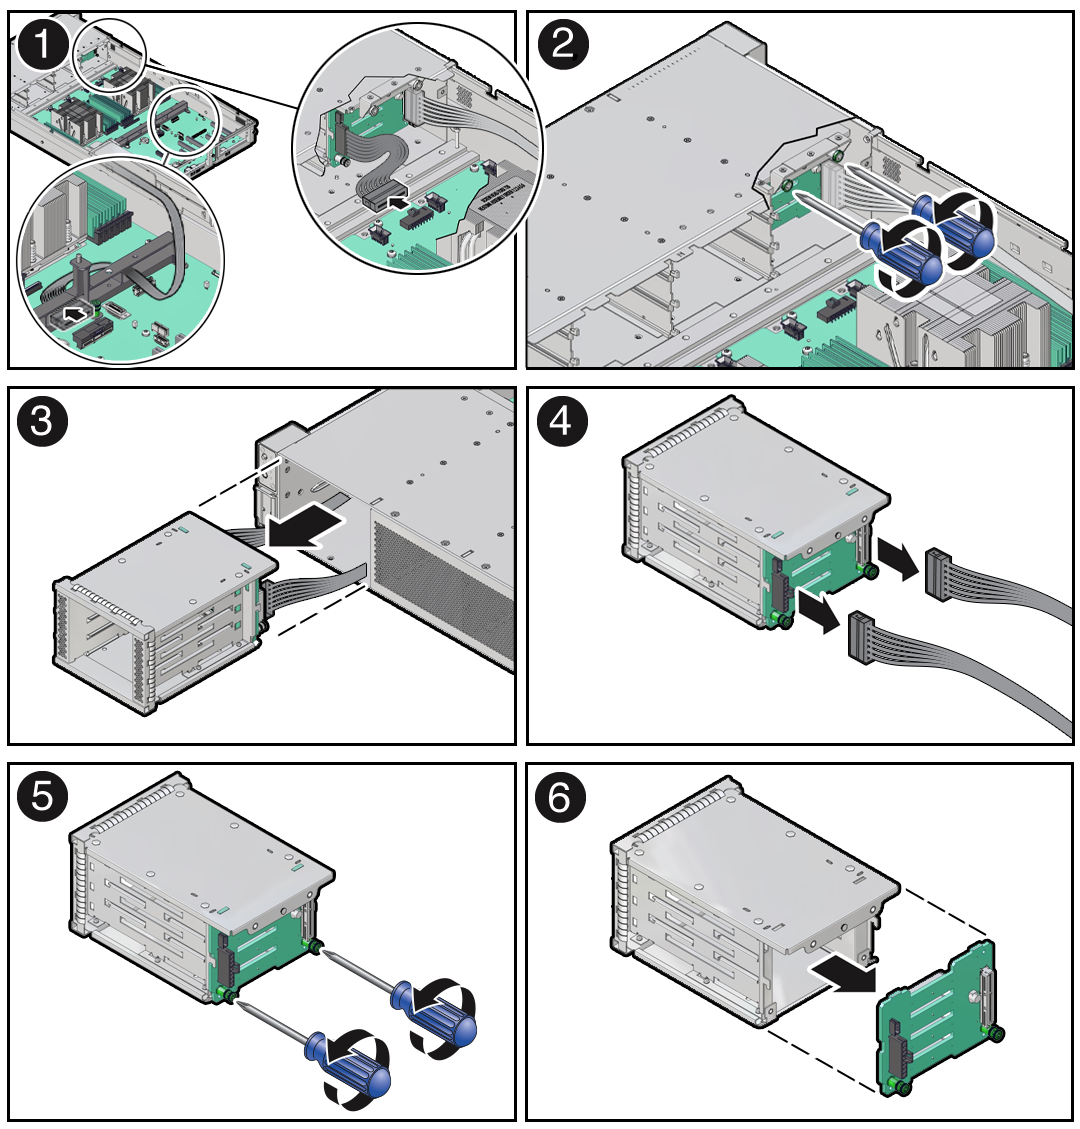 Figure showing the storage drive cage and 4-Drive disk backplane being removed from the server.